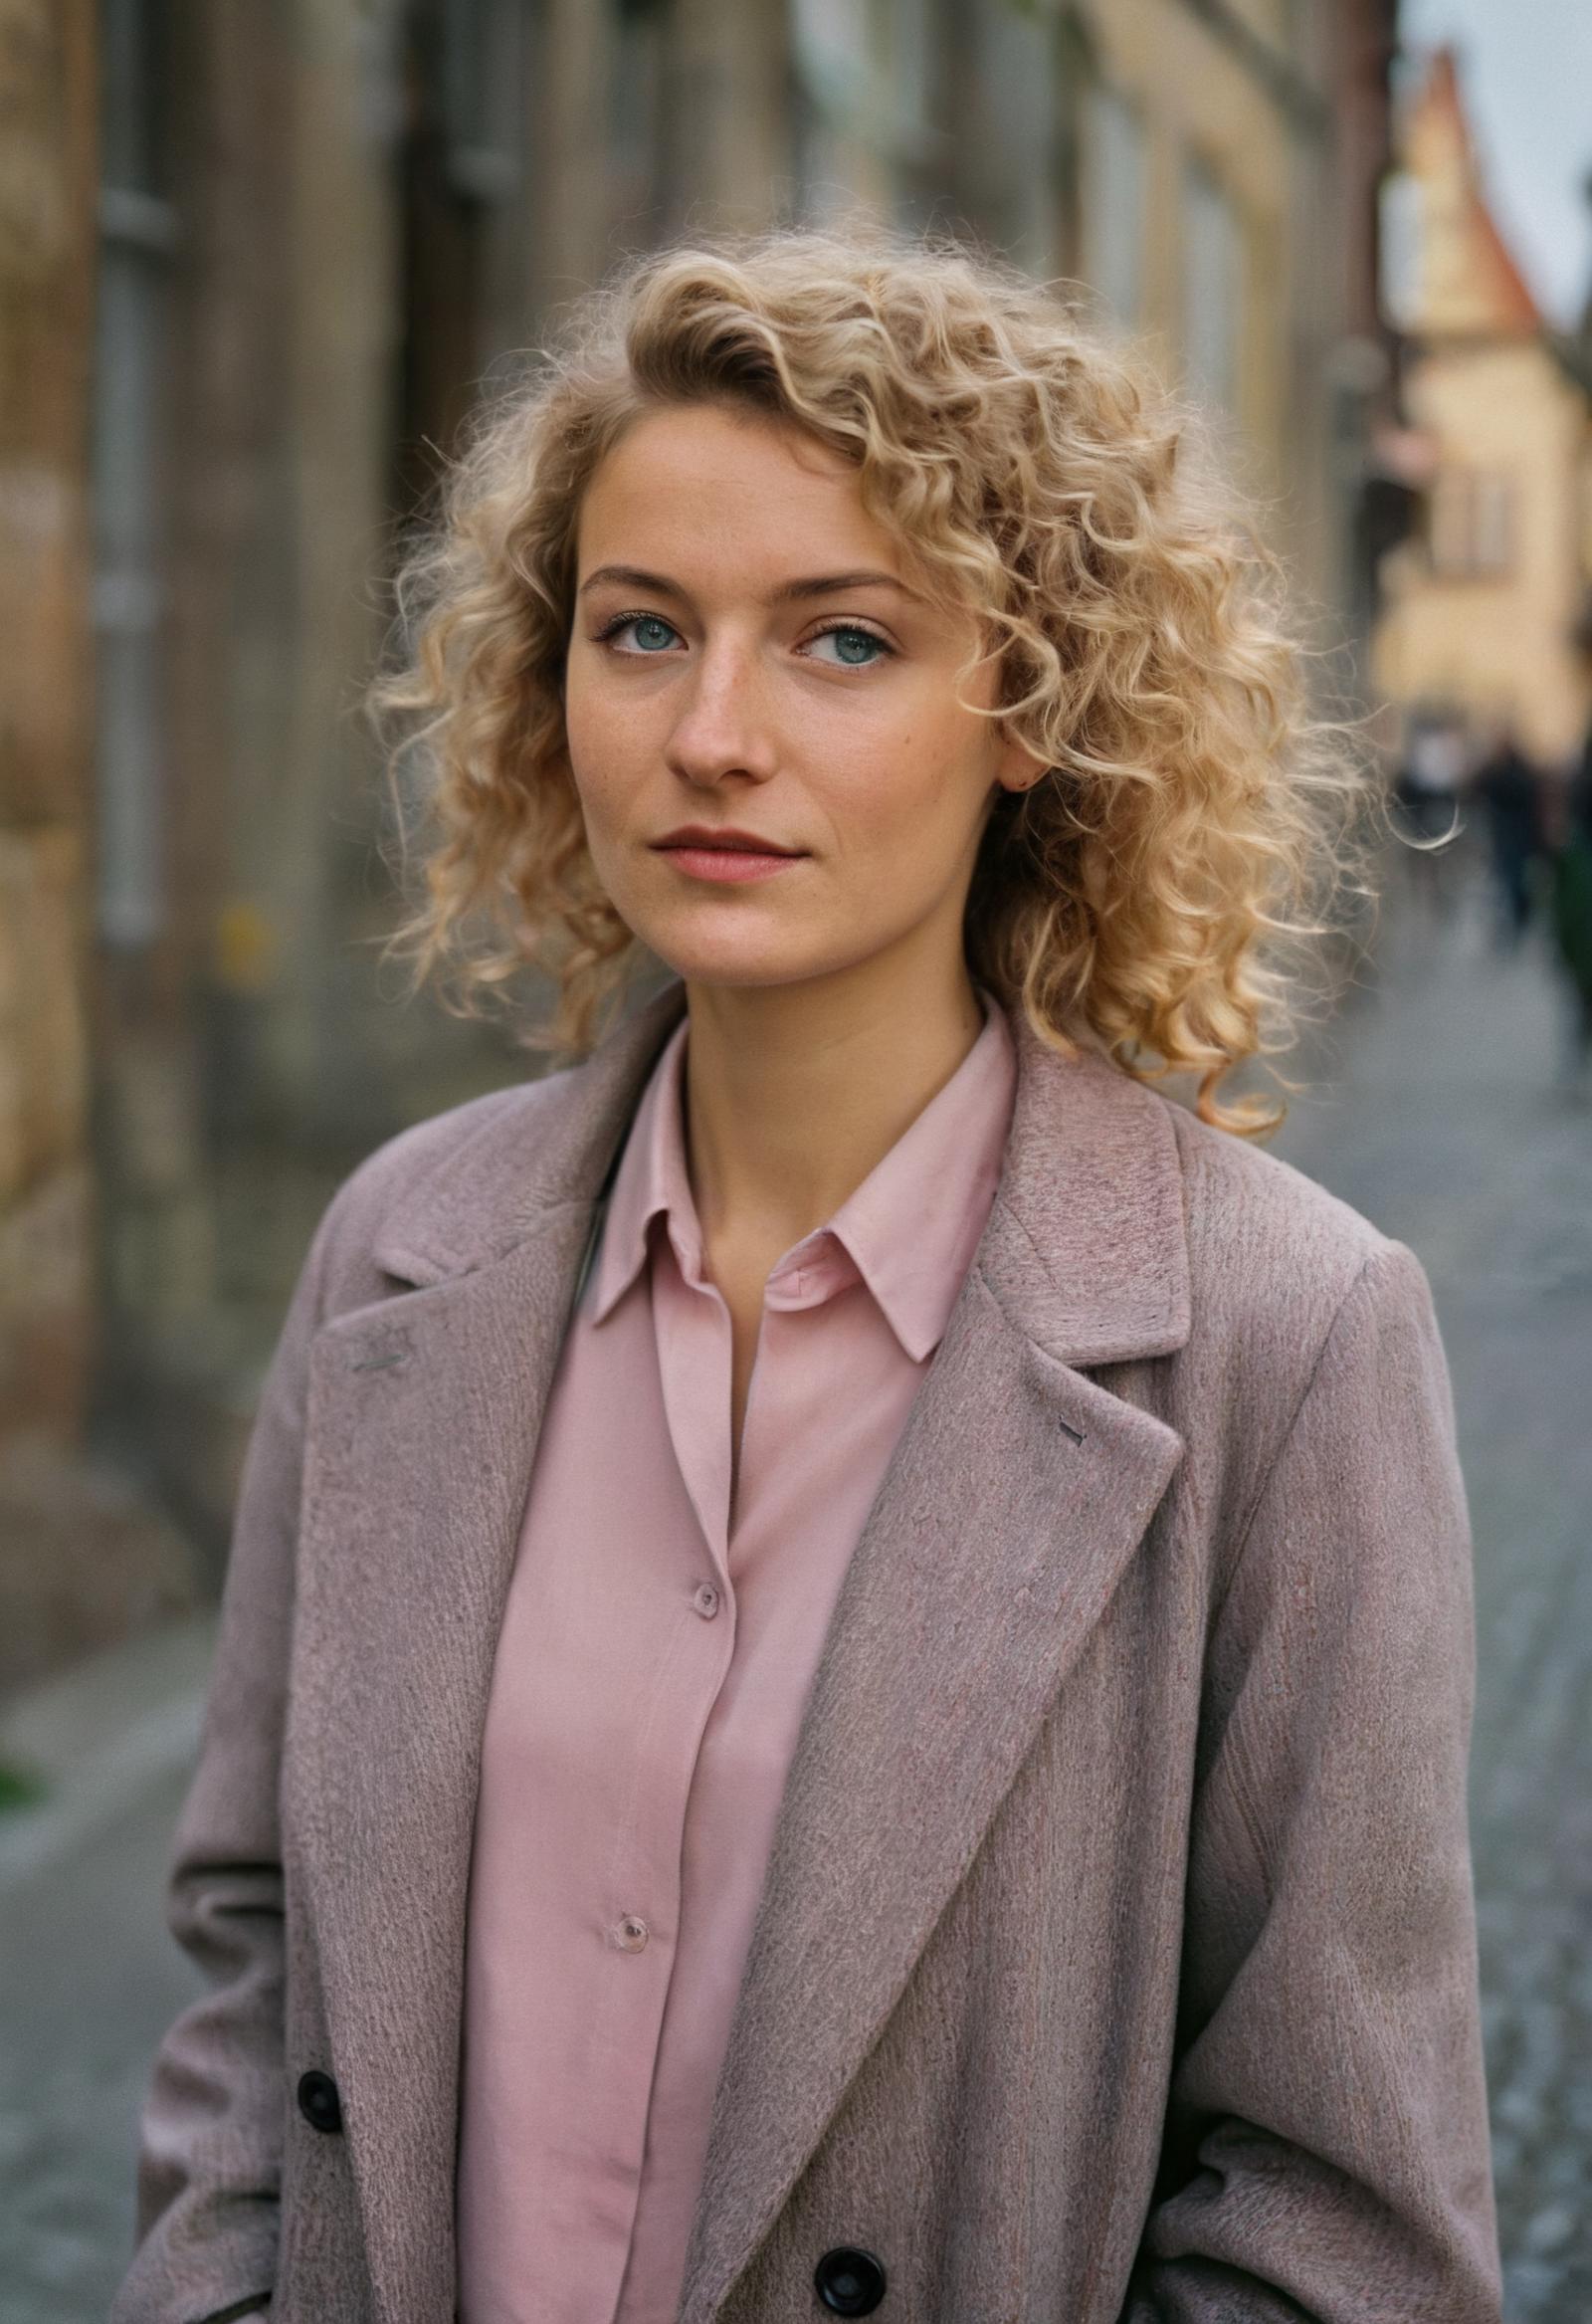 A woman with curly hair wearing a pink shirt and jacket.